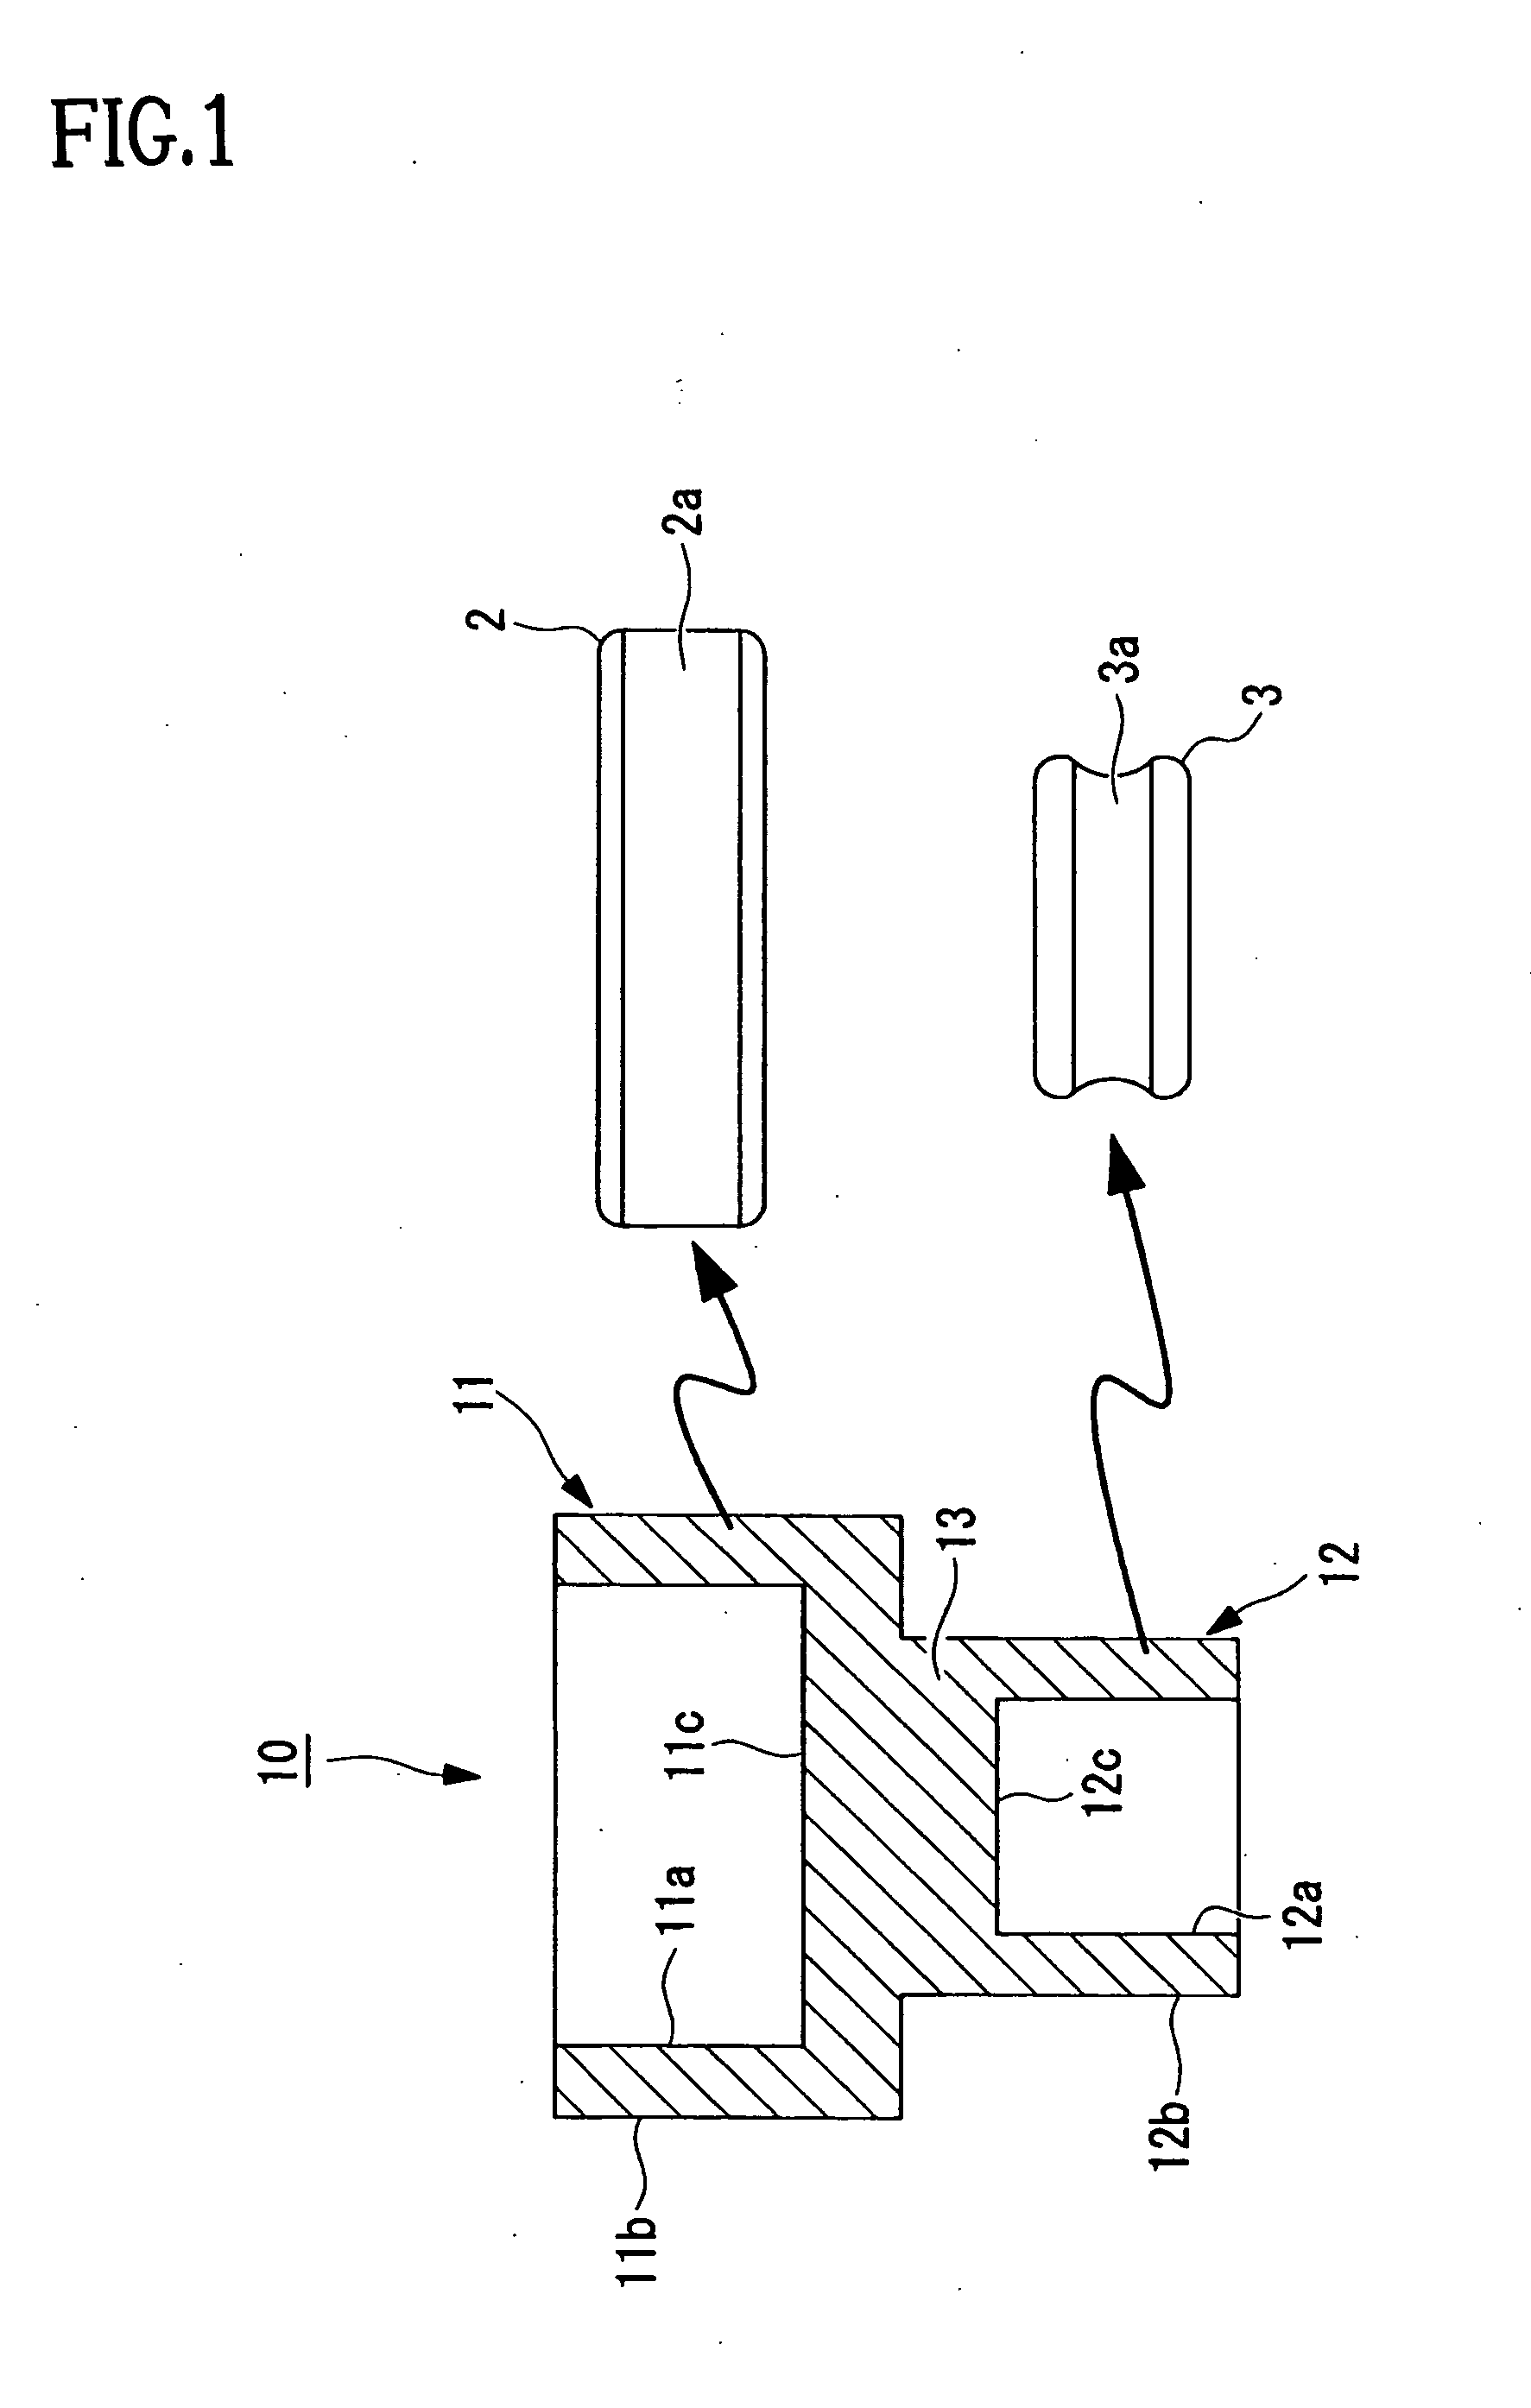 Blank for a ring member of a bearing, manufacturing method for the same,manufacturing method for a ring member of a mearing, and bearing